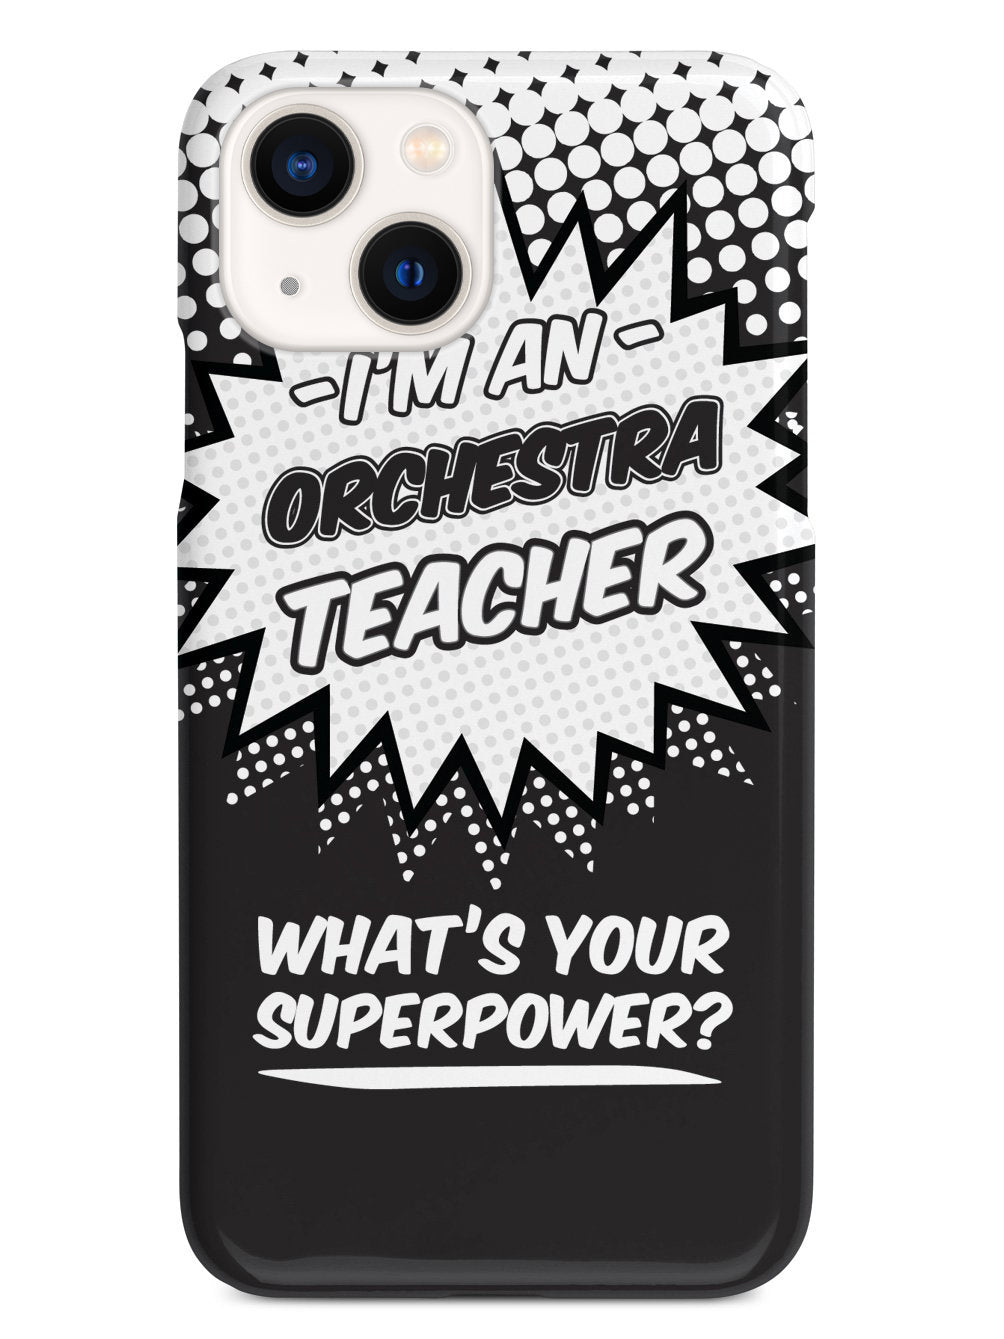 Orchestra Teacher - What's Your Superpower? Case